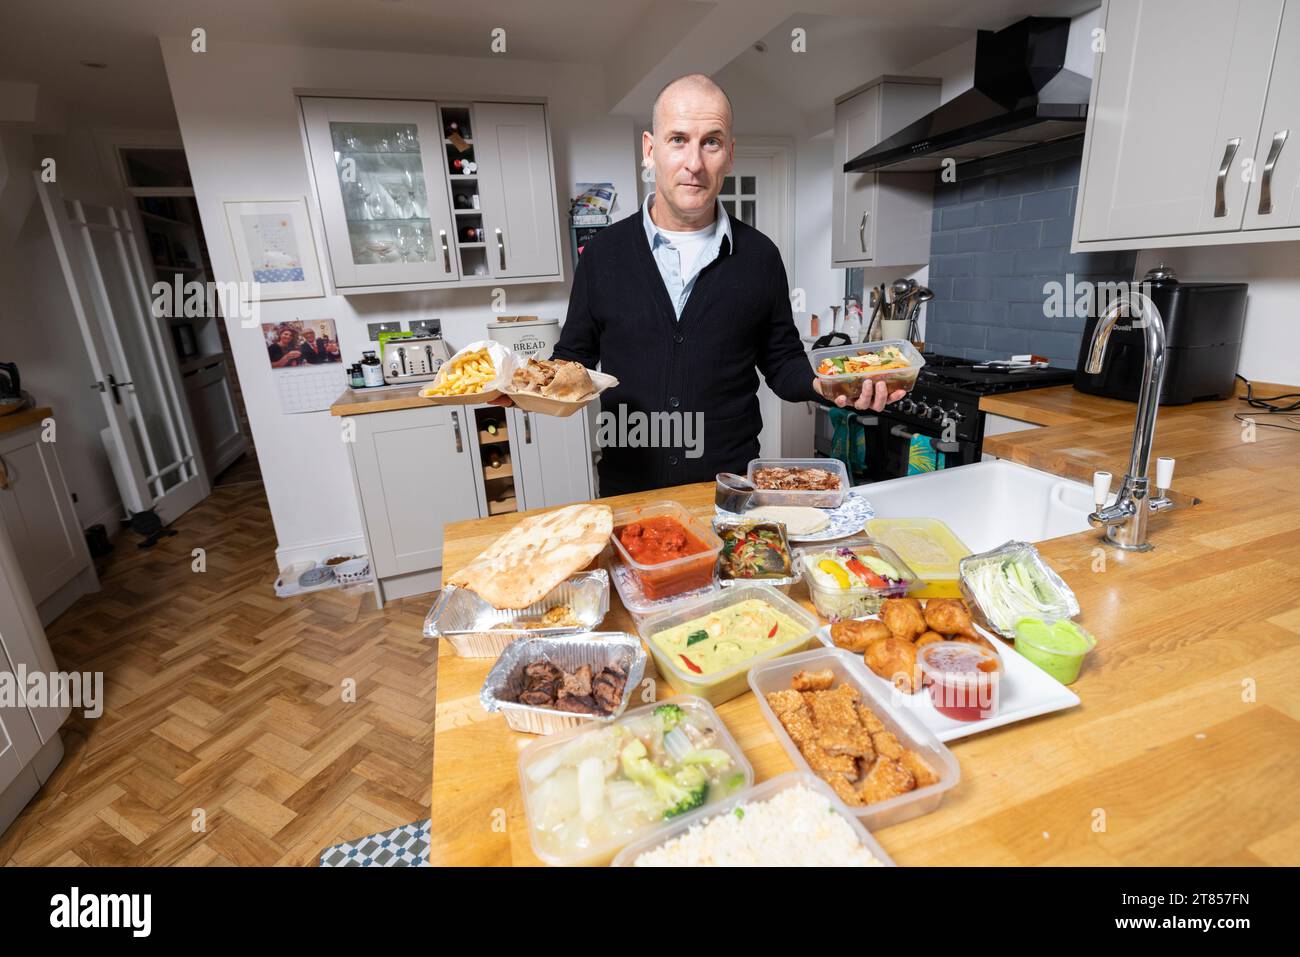 Man at home with section of take-away food on his kitchen work top, London, England, United Kingdom Stock Photo